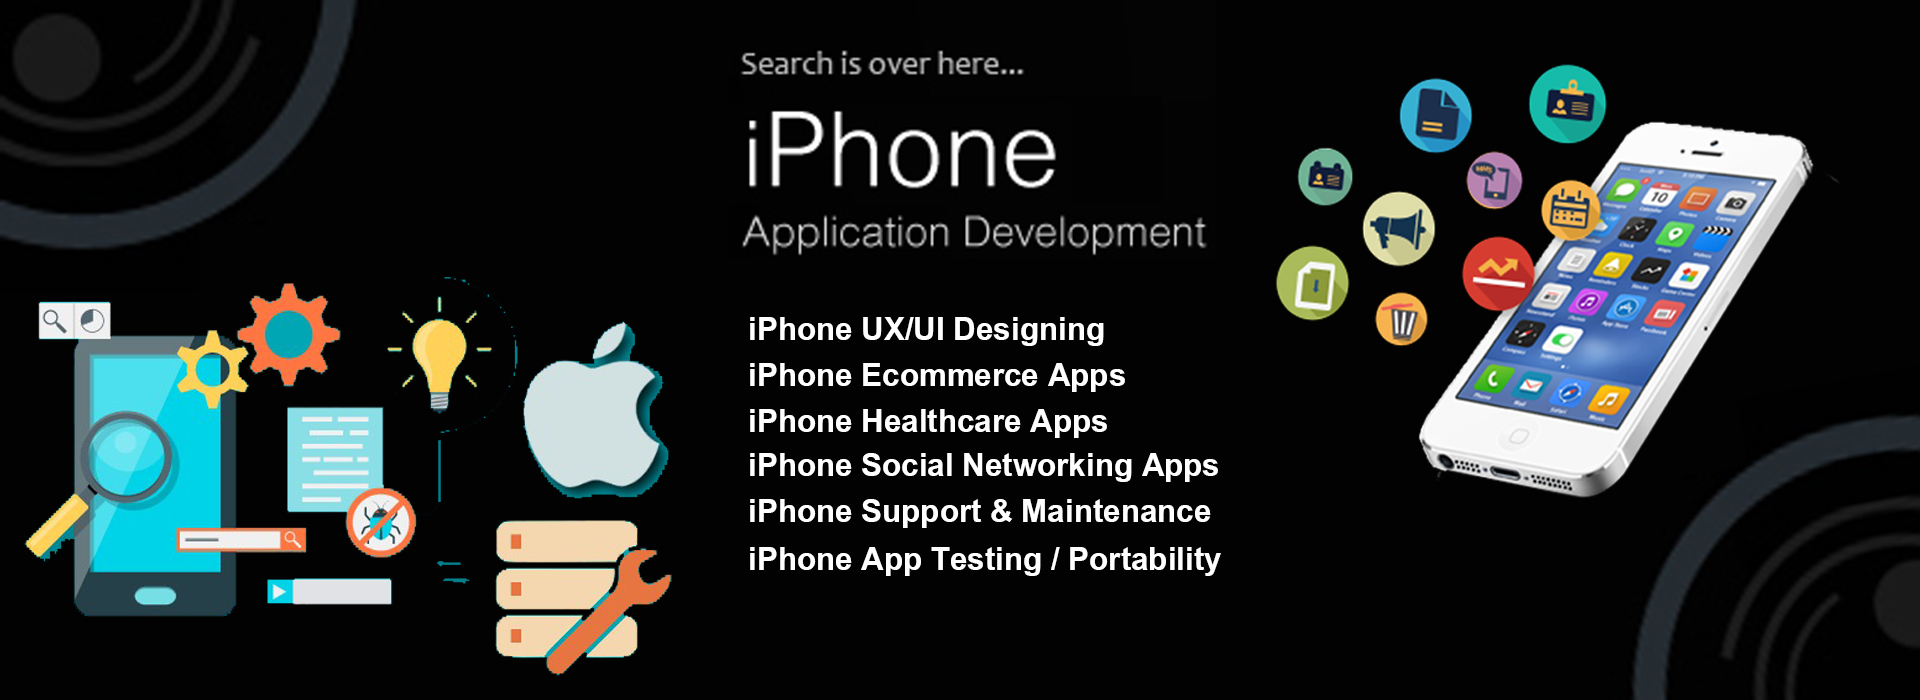 Hire iOS/ Swift App Developers, iPhone Application Development Company in Ahmedabad India